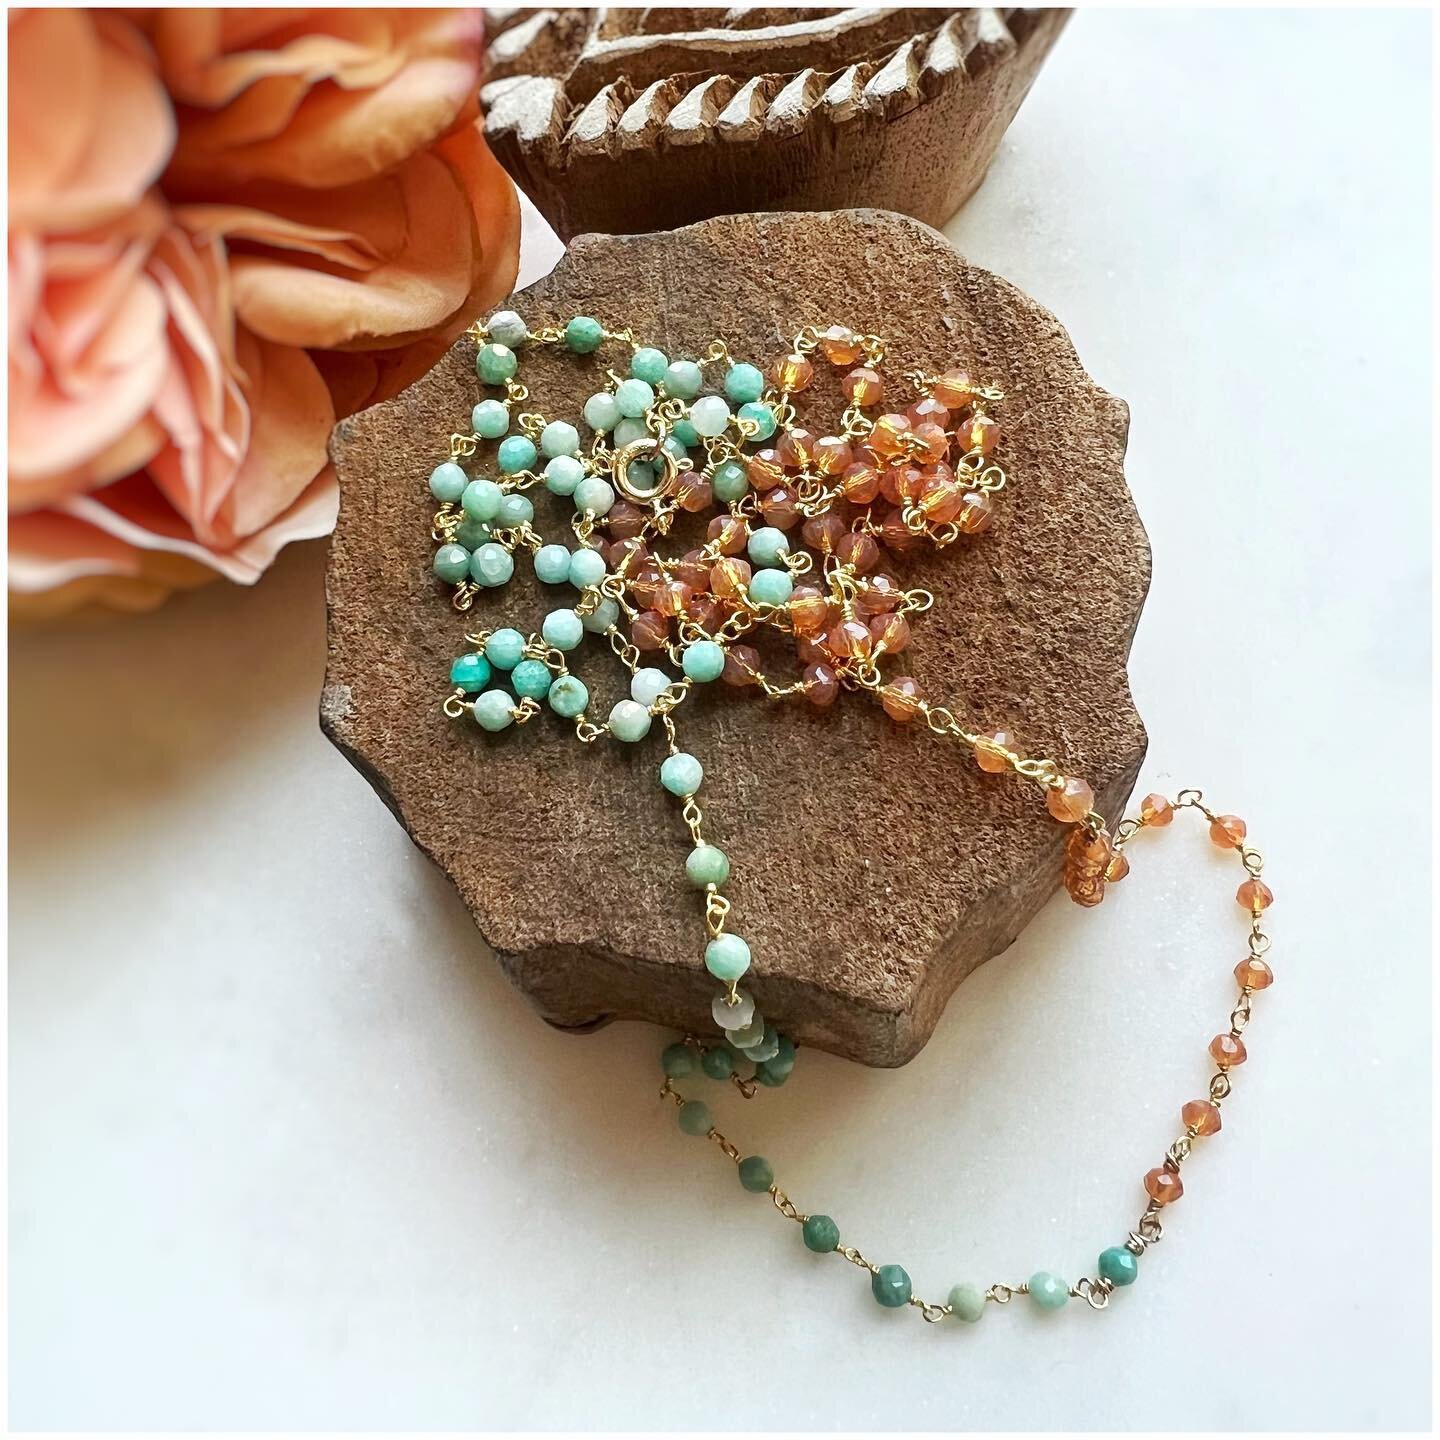 Happy Friday!! The warm weather is upon us ...at least here in the south, which carries along a few things ...vacations, outdoor parties &amp; events, and lighter clothing. I always love my spring and summer jewelry pieces ...as they just seem more F